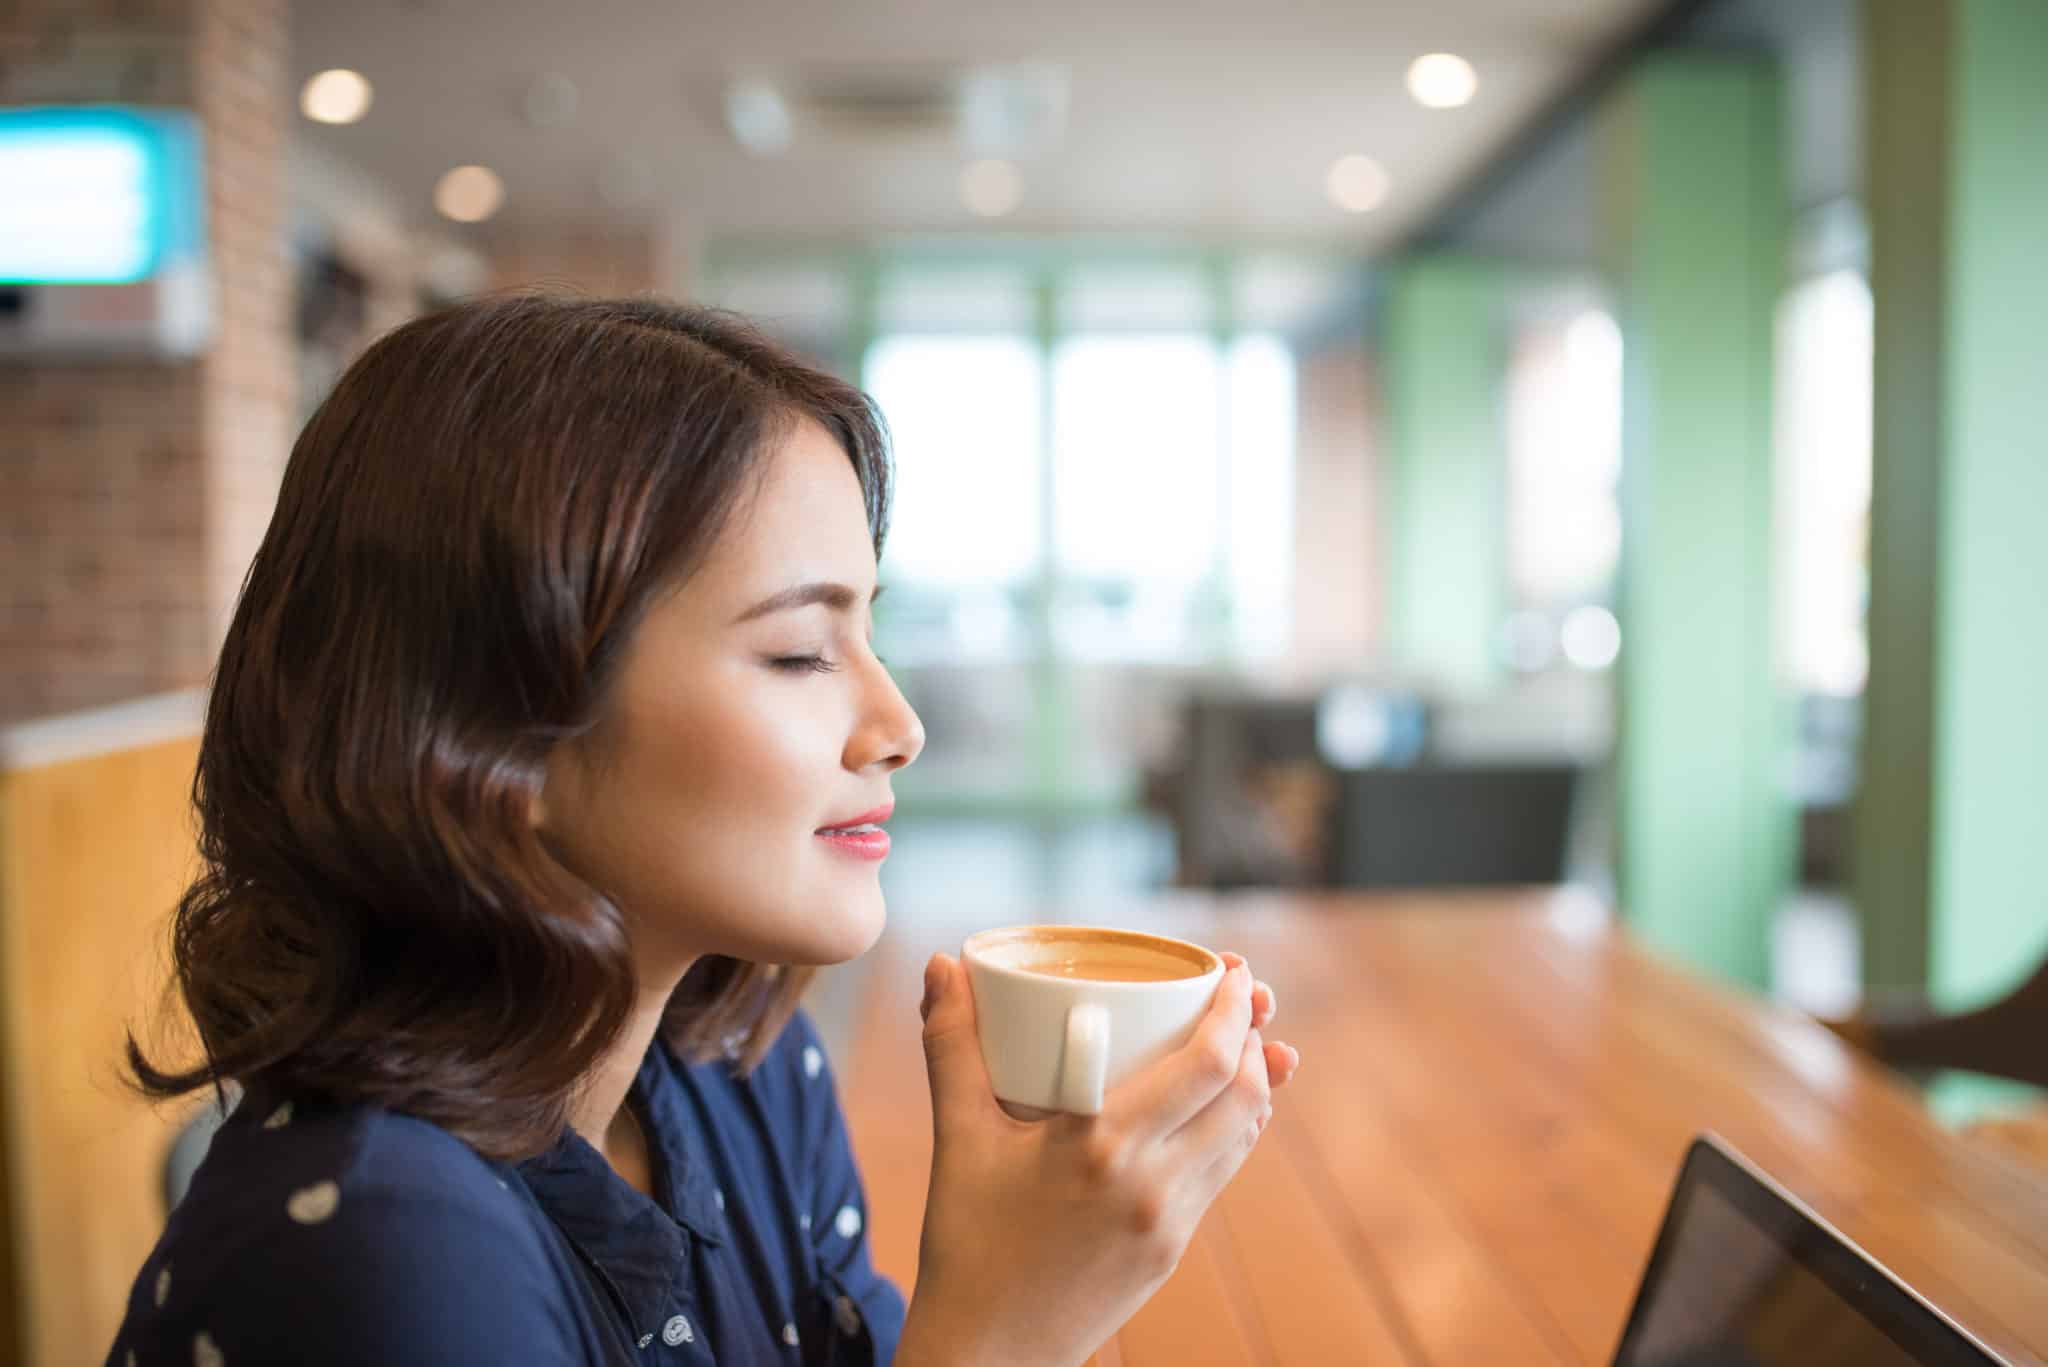 Woman savoring her cup of coffee